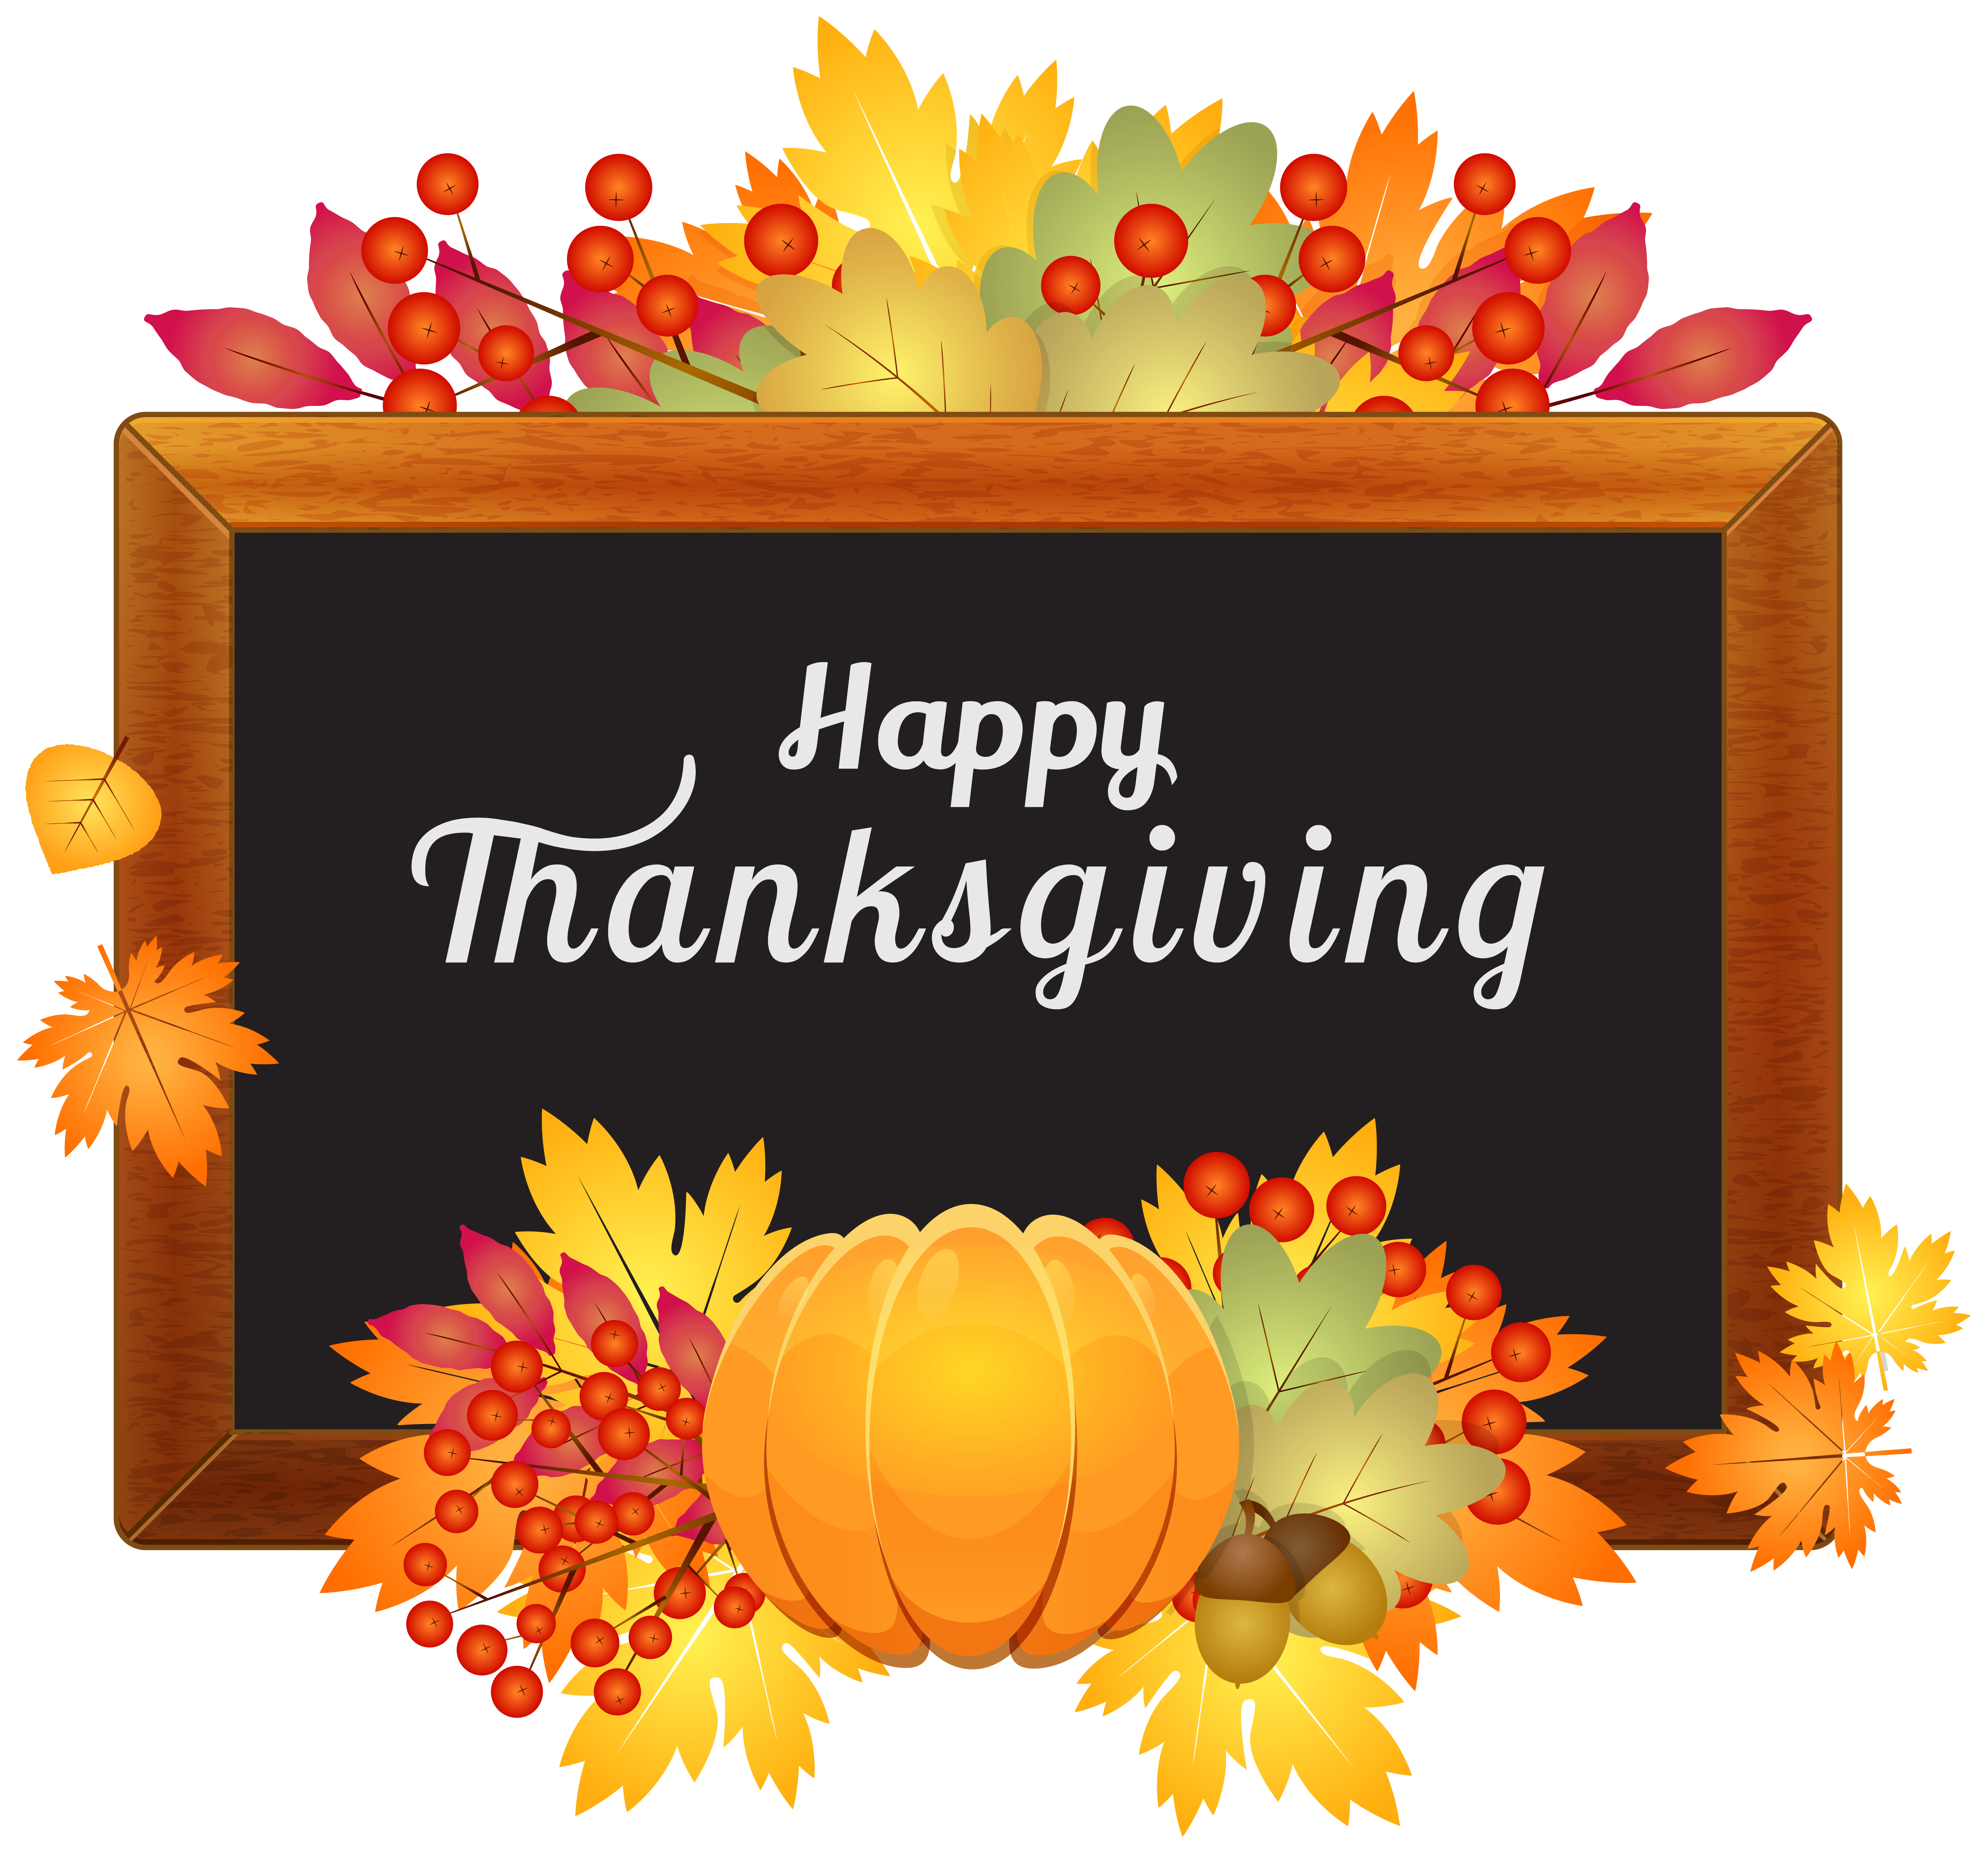 Happy Thanksgiving Images Clipart Thanksgiving Clip Art Pictures